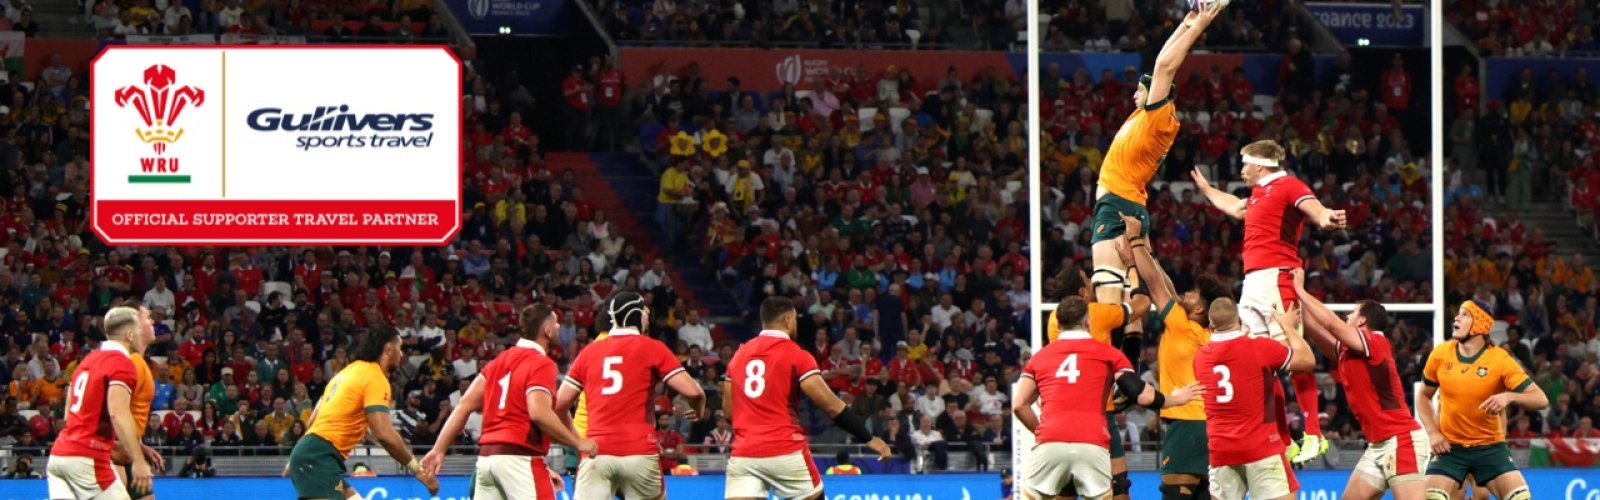 Australia v Wales ticket packages with hotel and travel options image